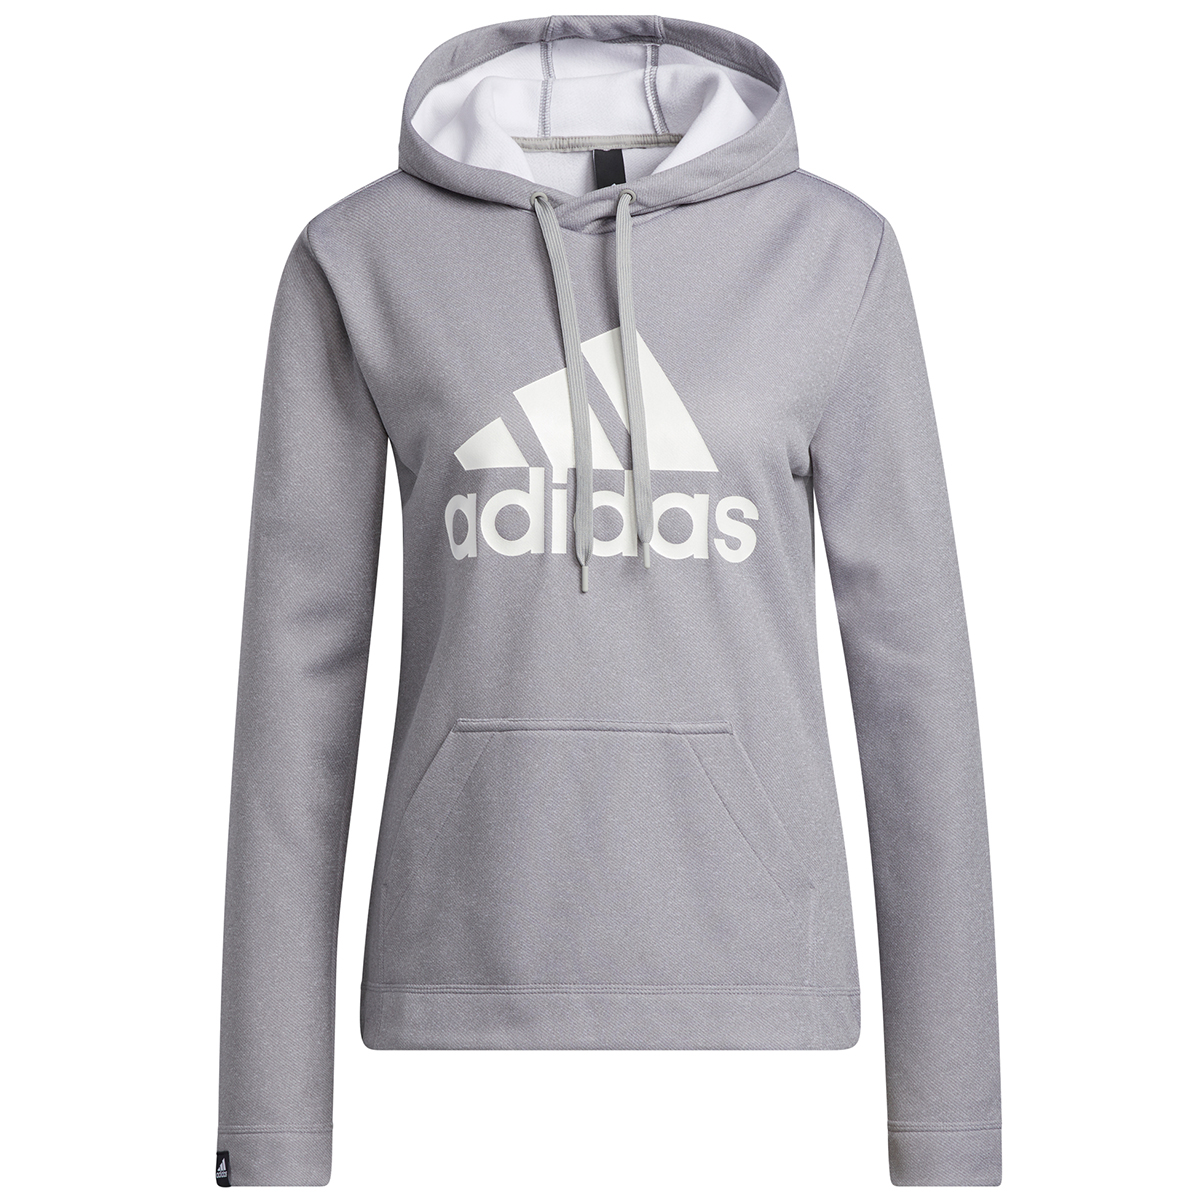 Adidas Women's Game And Go Pullover Hoodie